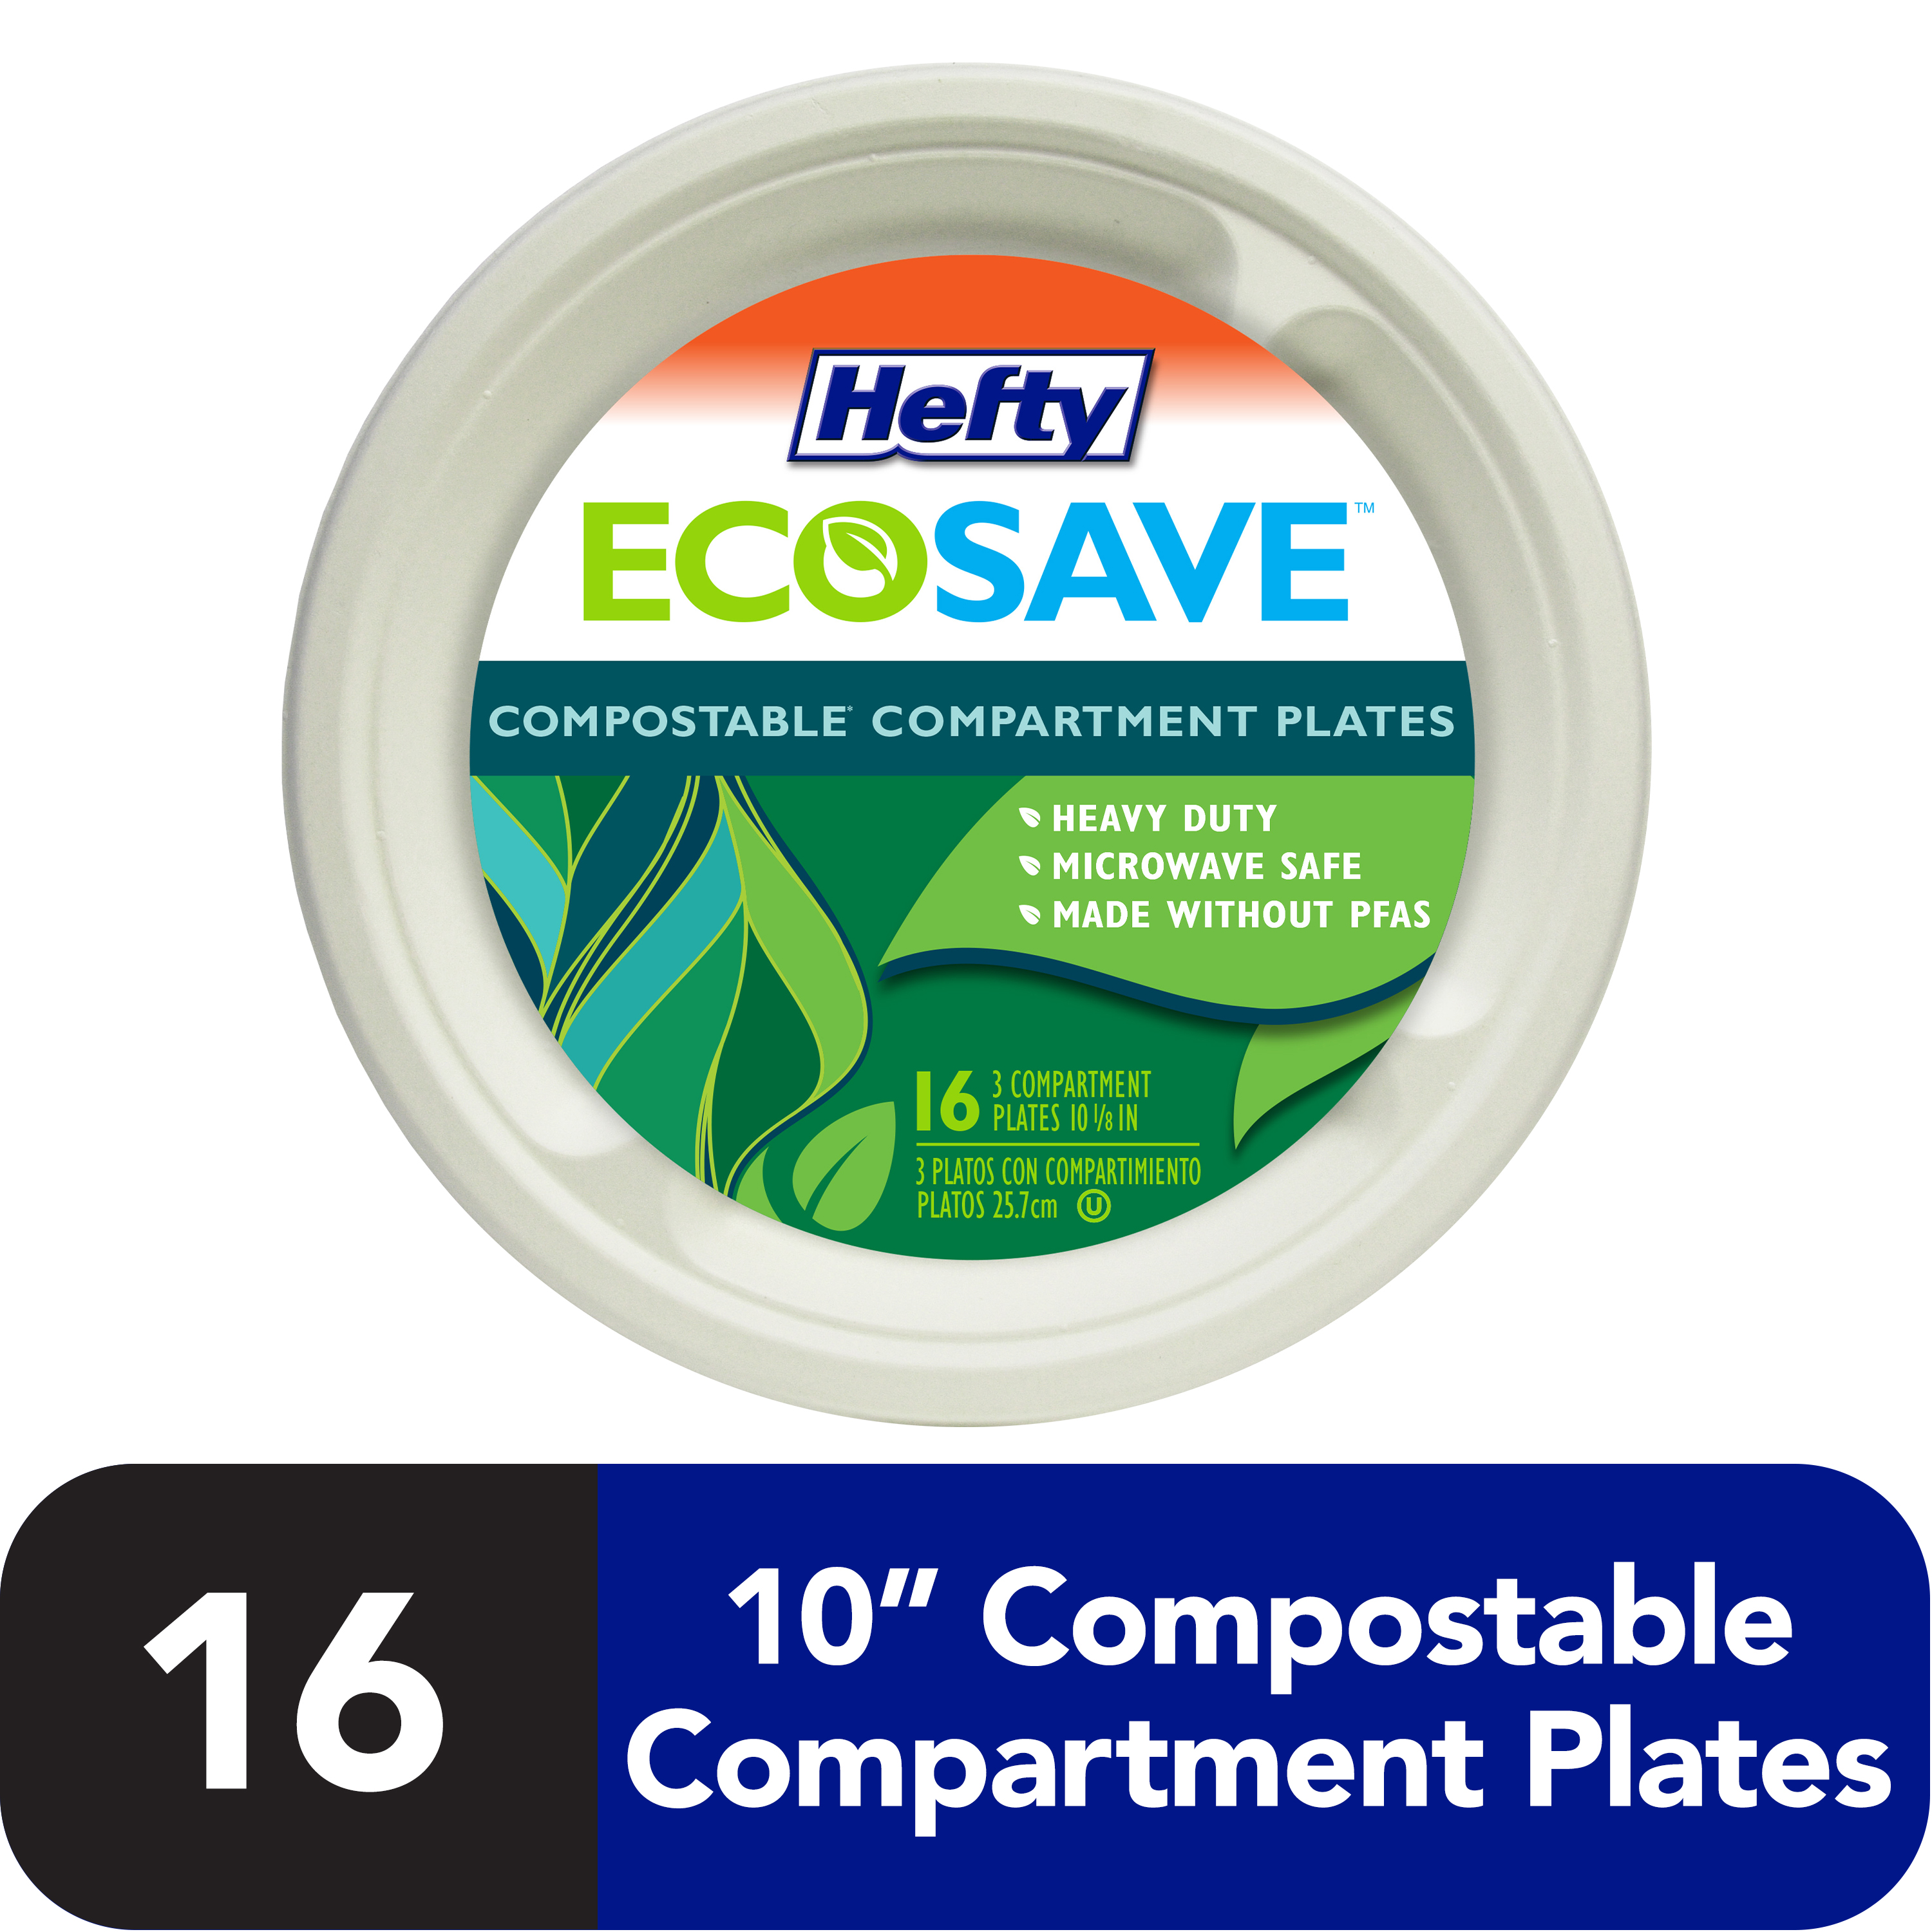 Hefty ECOSAVE Compostable Paper Plates, 10-1/8 inch, 16 Count - image 1 of 7